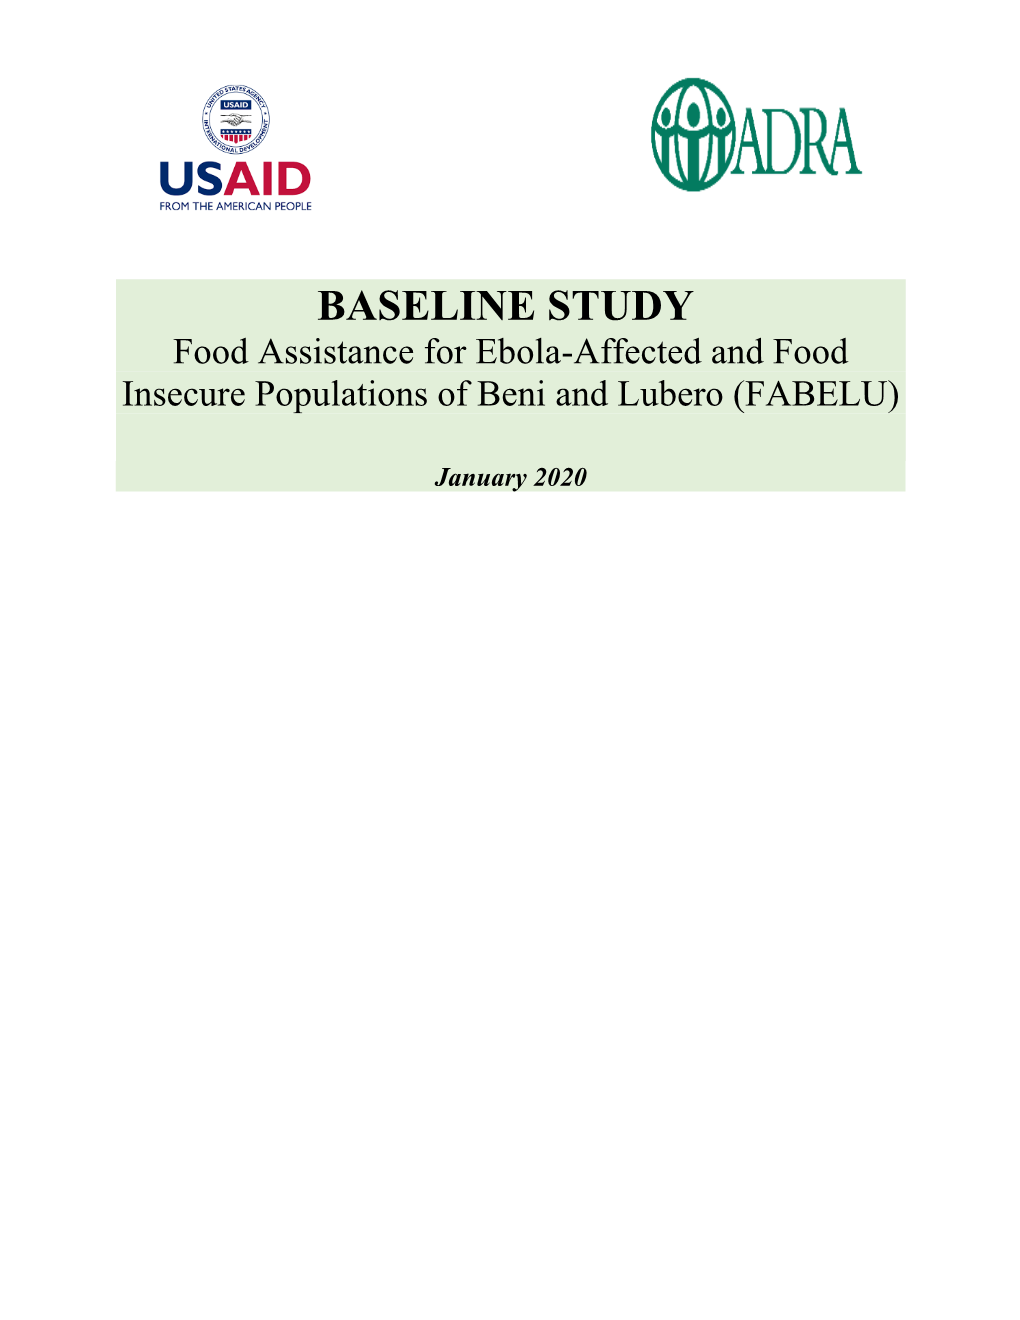 BASELINE STUDY Food Assistance for Ebola-Affected and Food Insecure Populations of Beni and Lubero (FABELU)